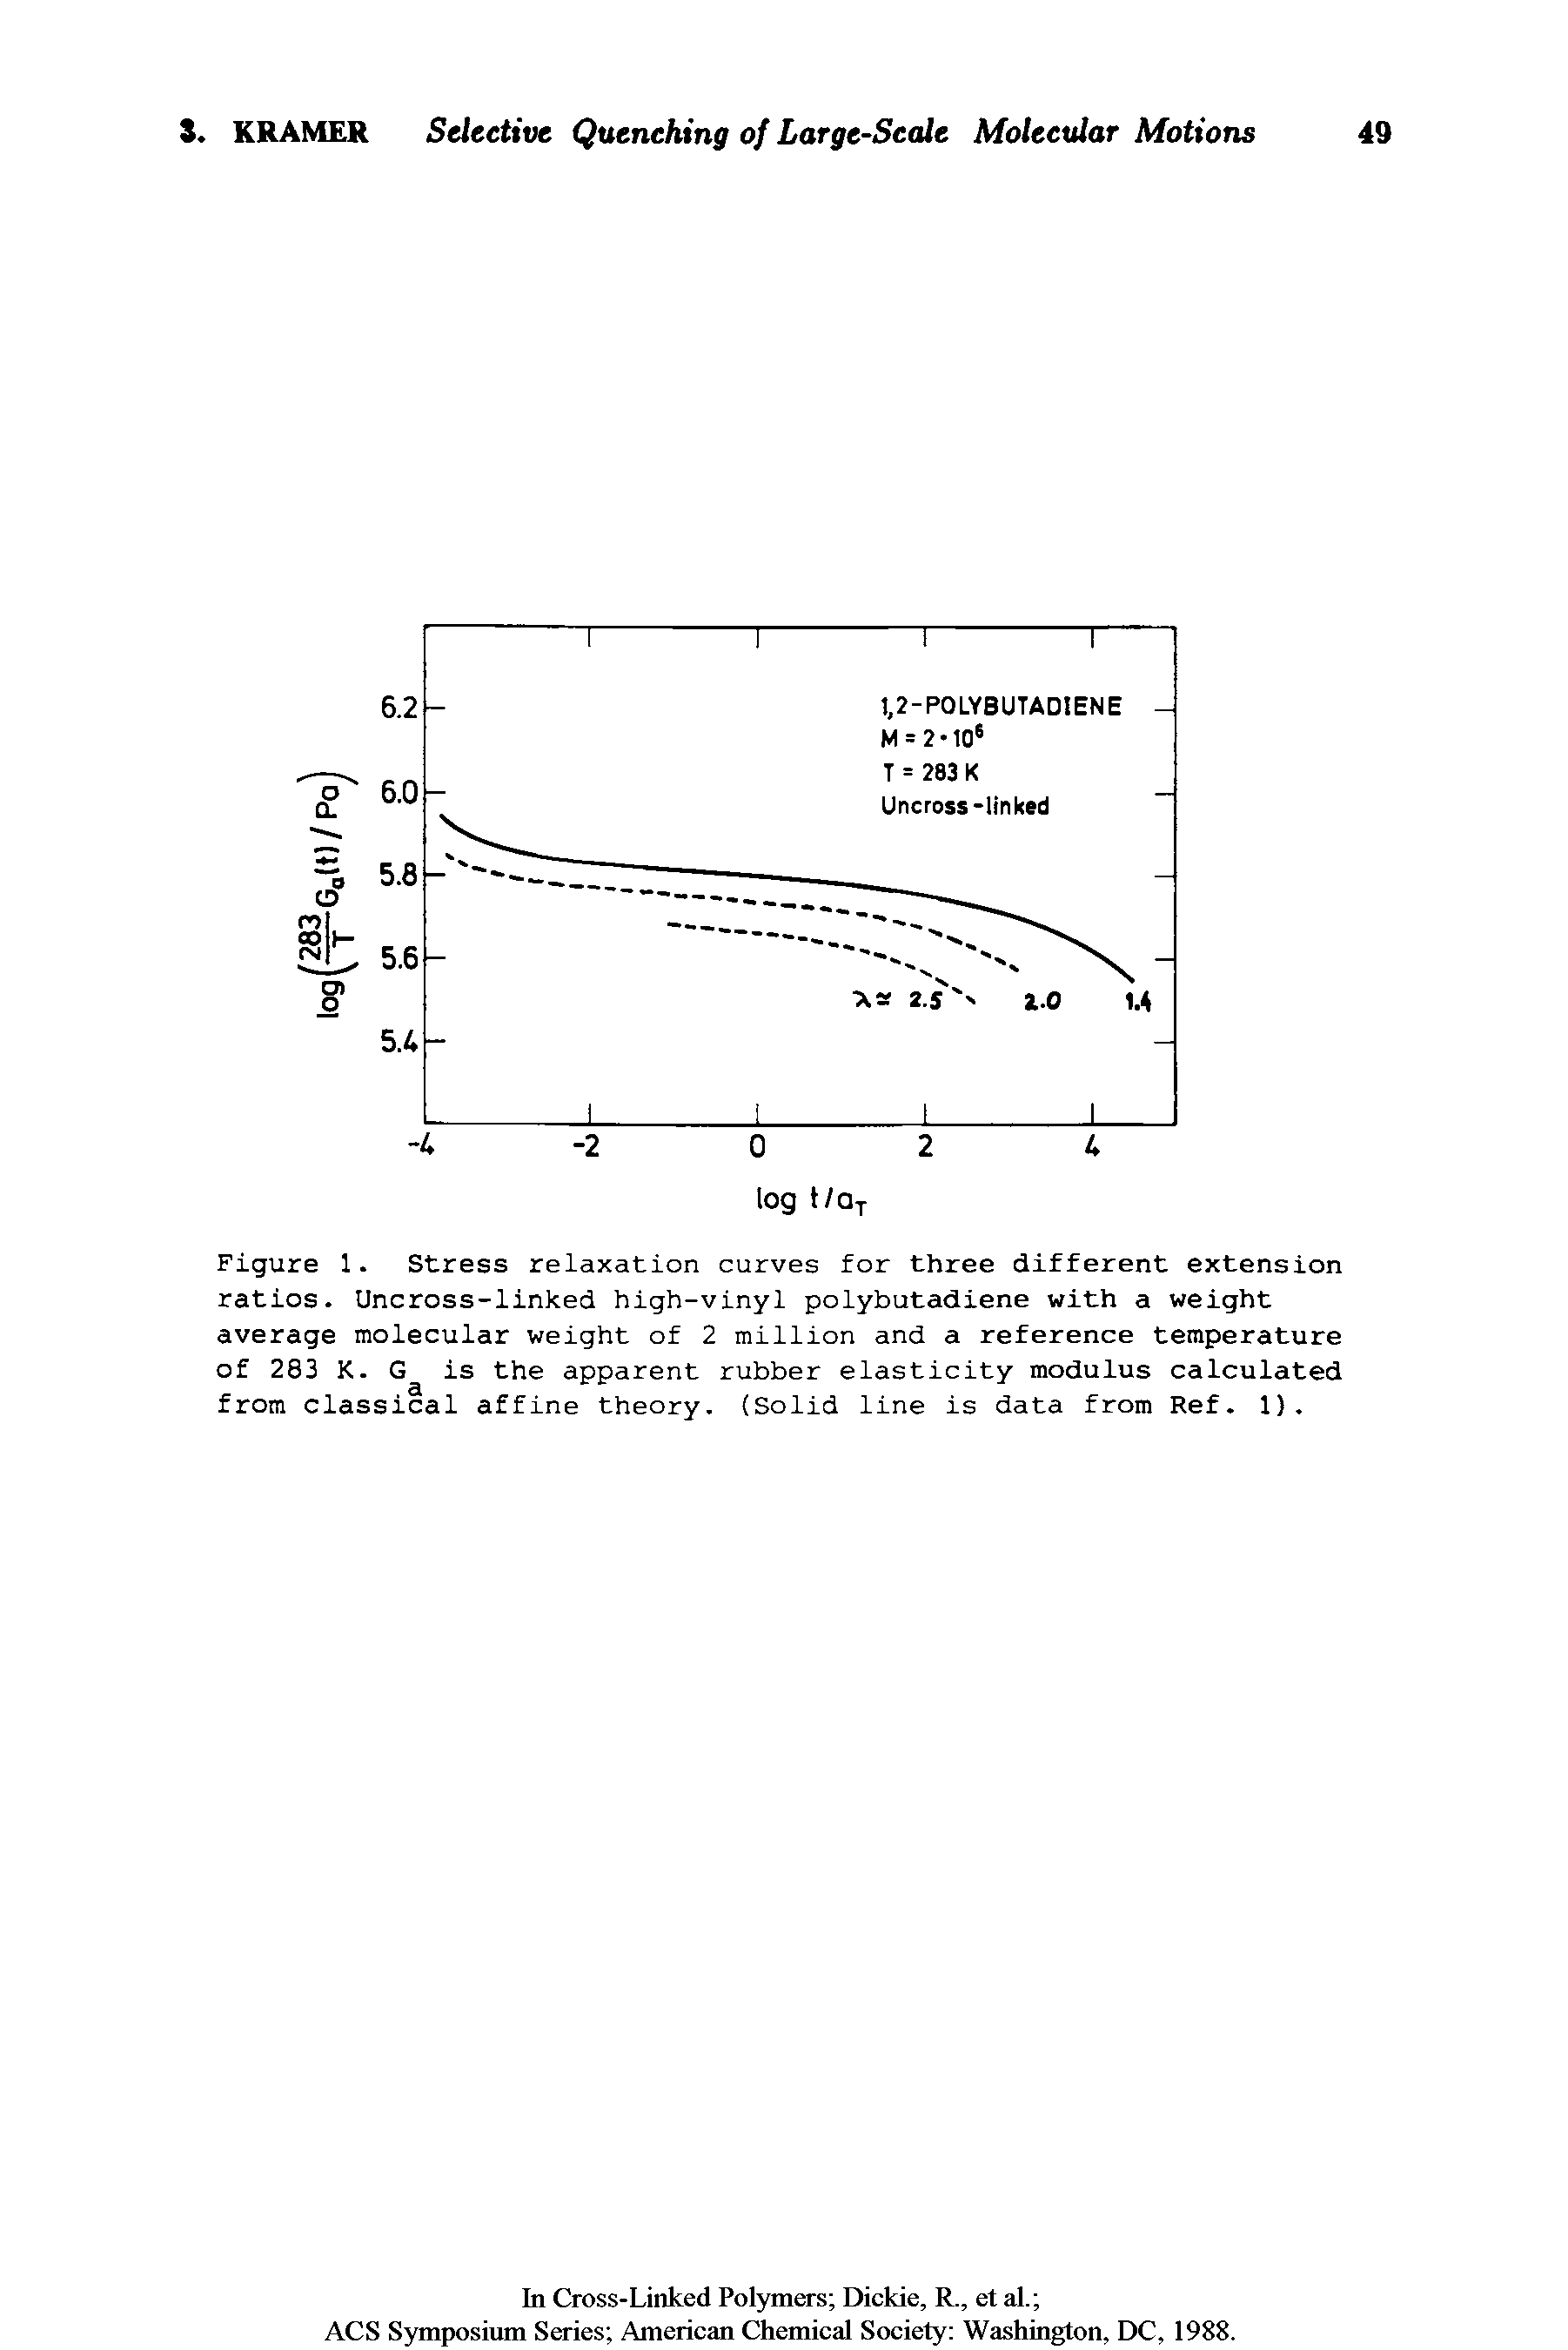 Figure 1. Stress relaxation curves for three different extension ratios. Uncross-linked high-vinyl polybutadiene with a weight average molecular weight of 2 million and a reference temperature of 283 K. G is the apparent rubber elasticity modulus calculated from classical affine theory. (Solid line is data from Ref. 1).